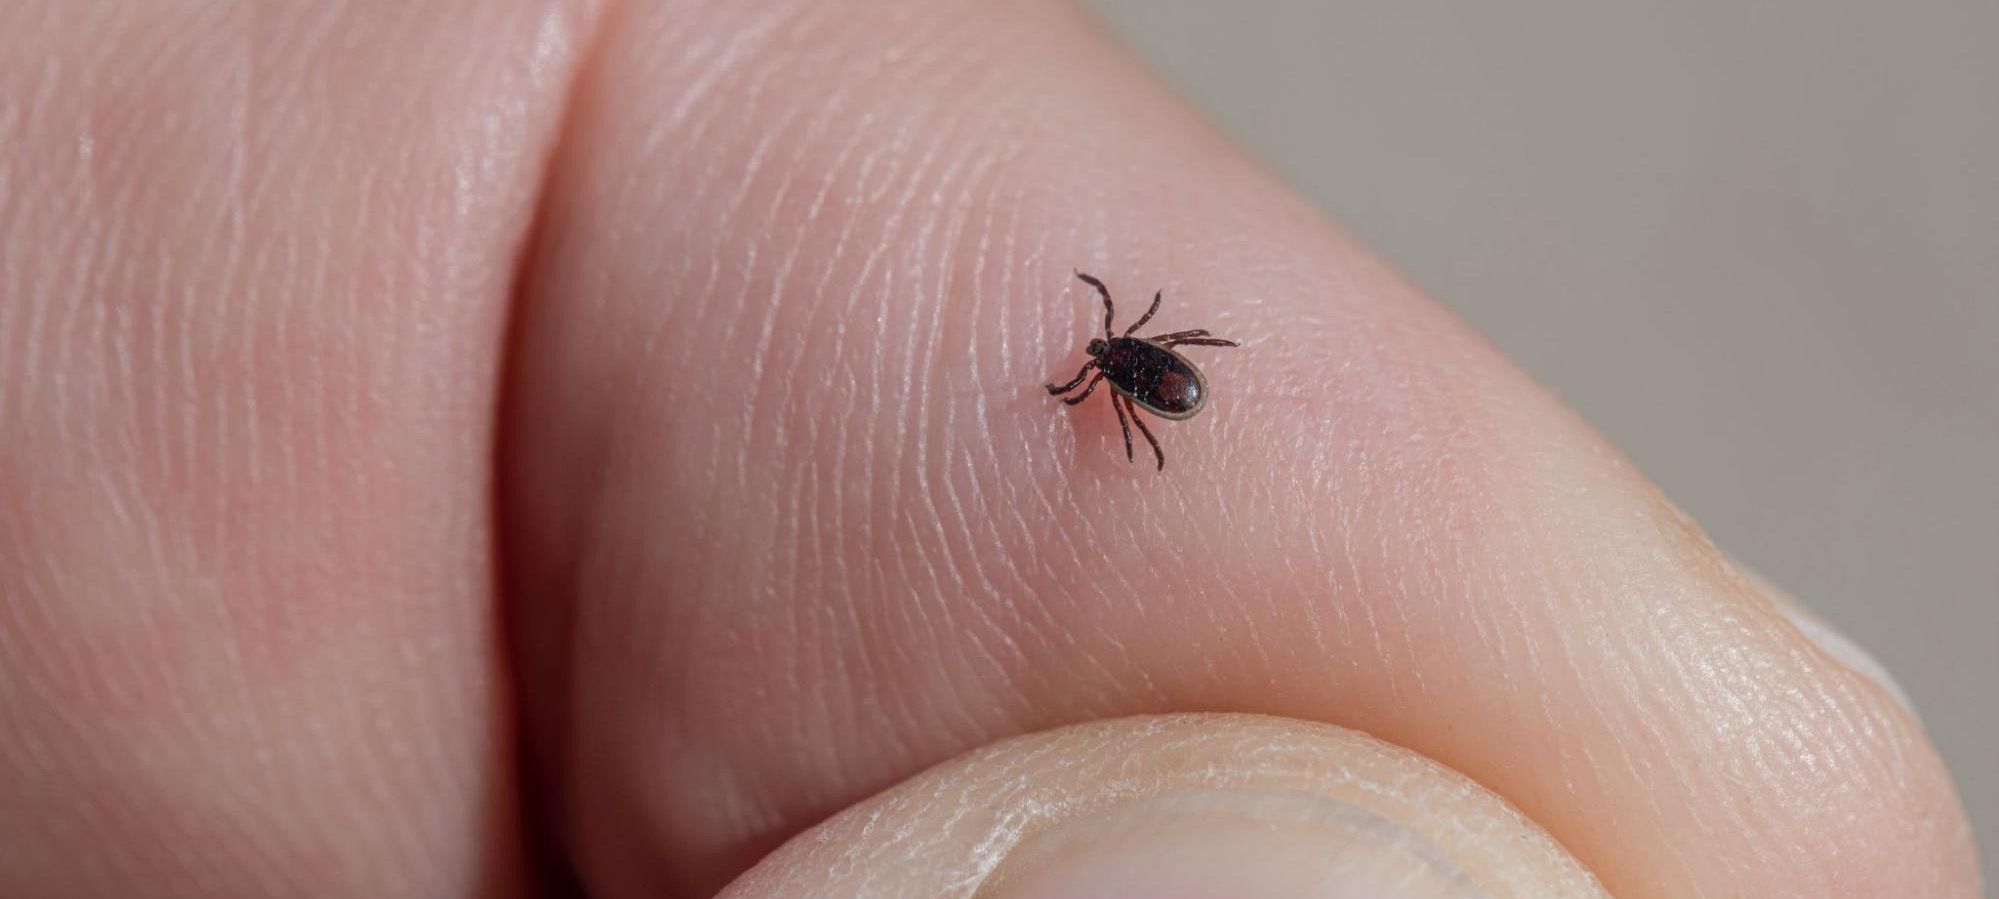 It’s Tick Season! What to Do if You Are Bit!